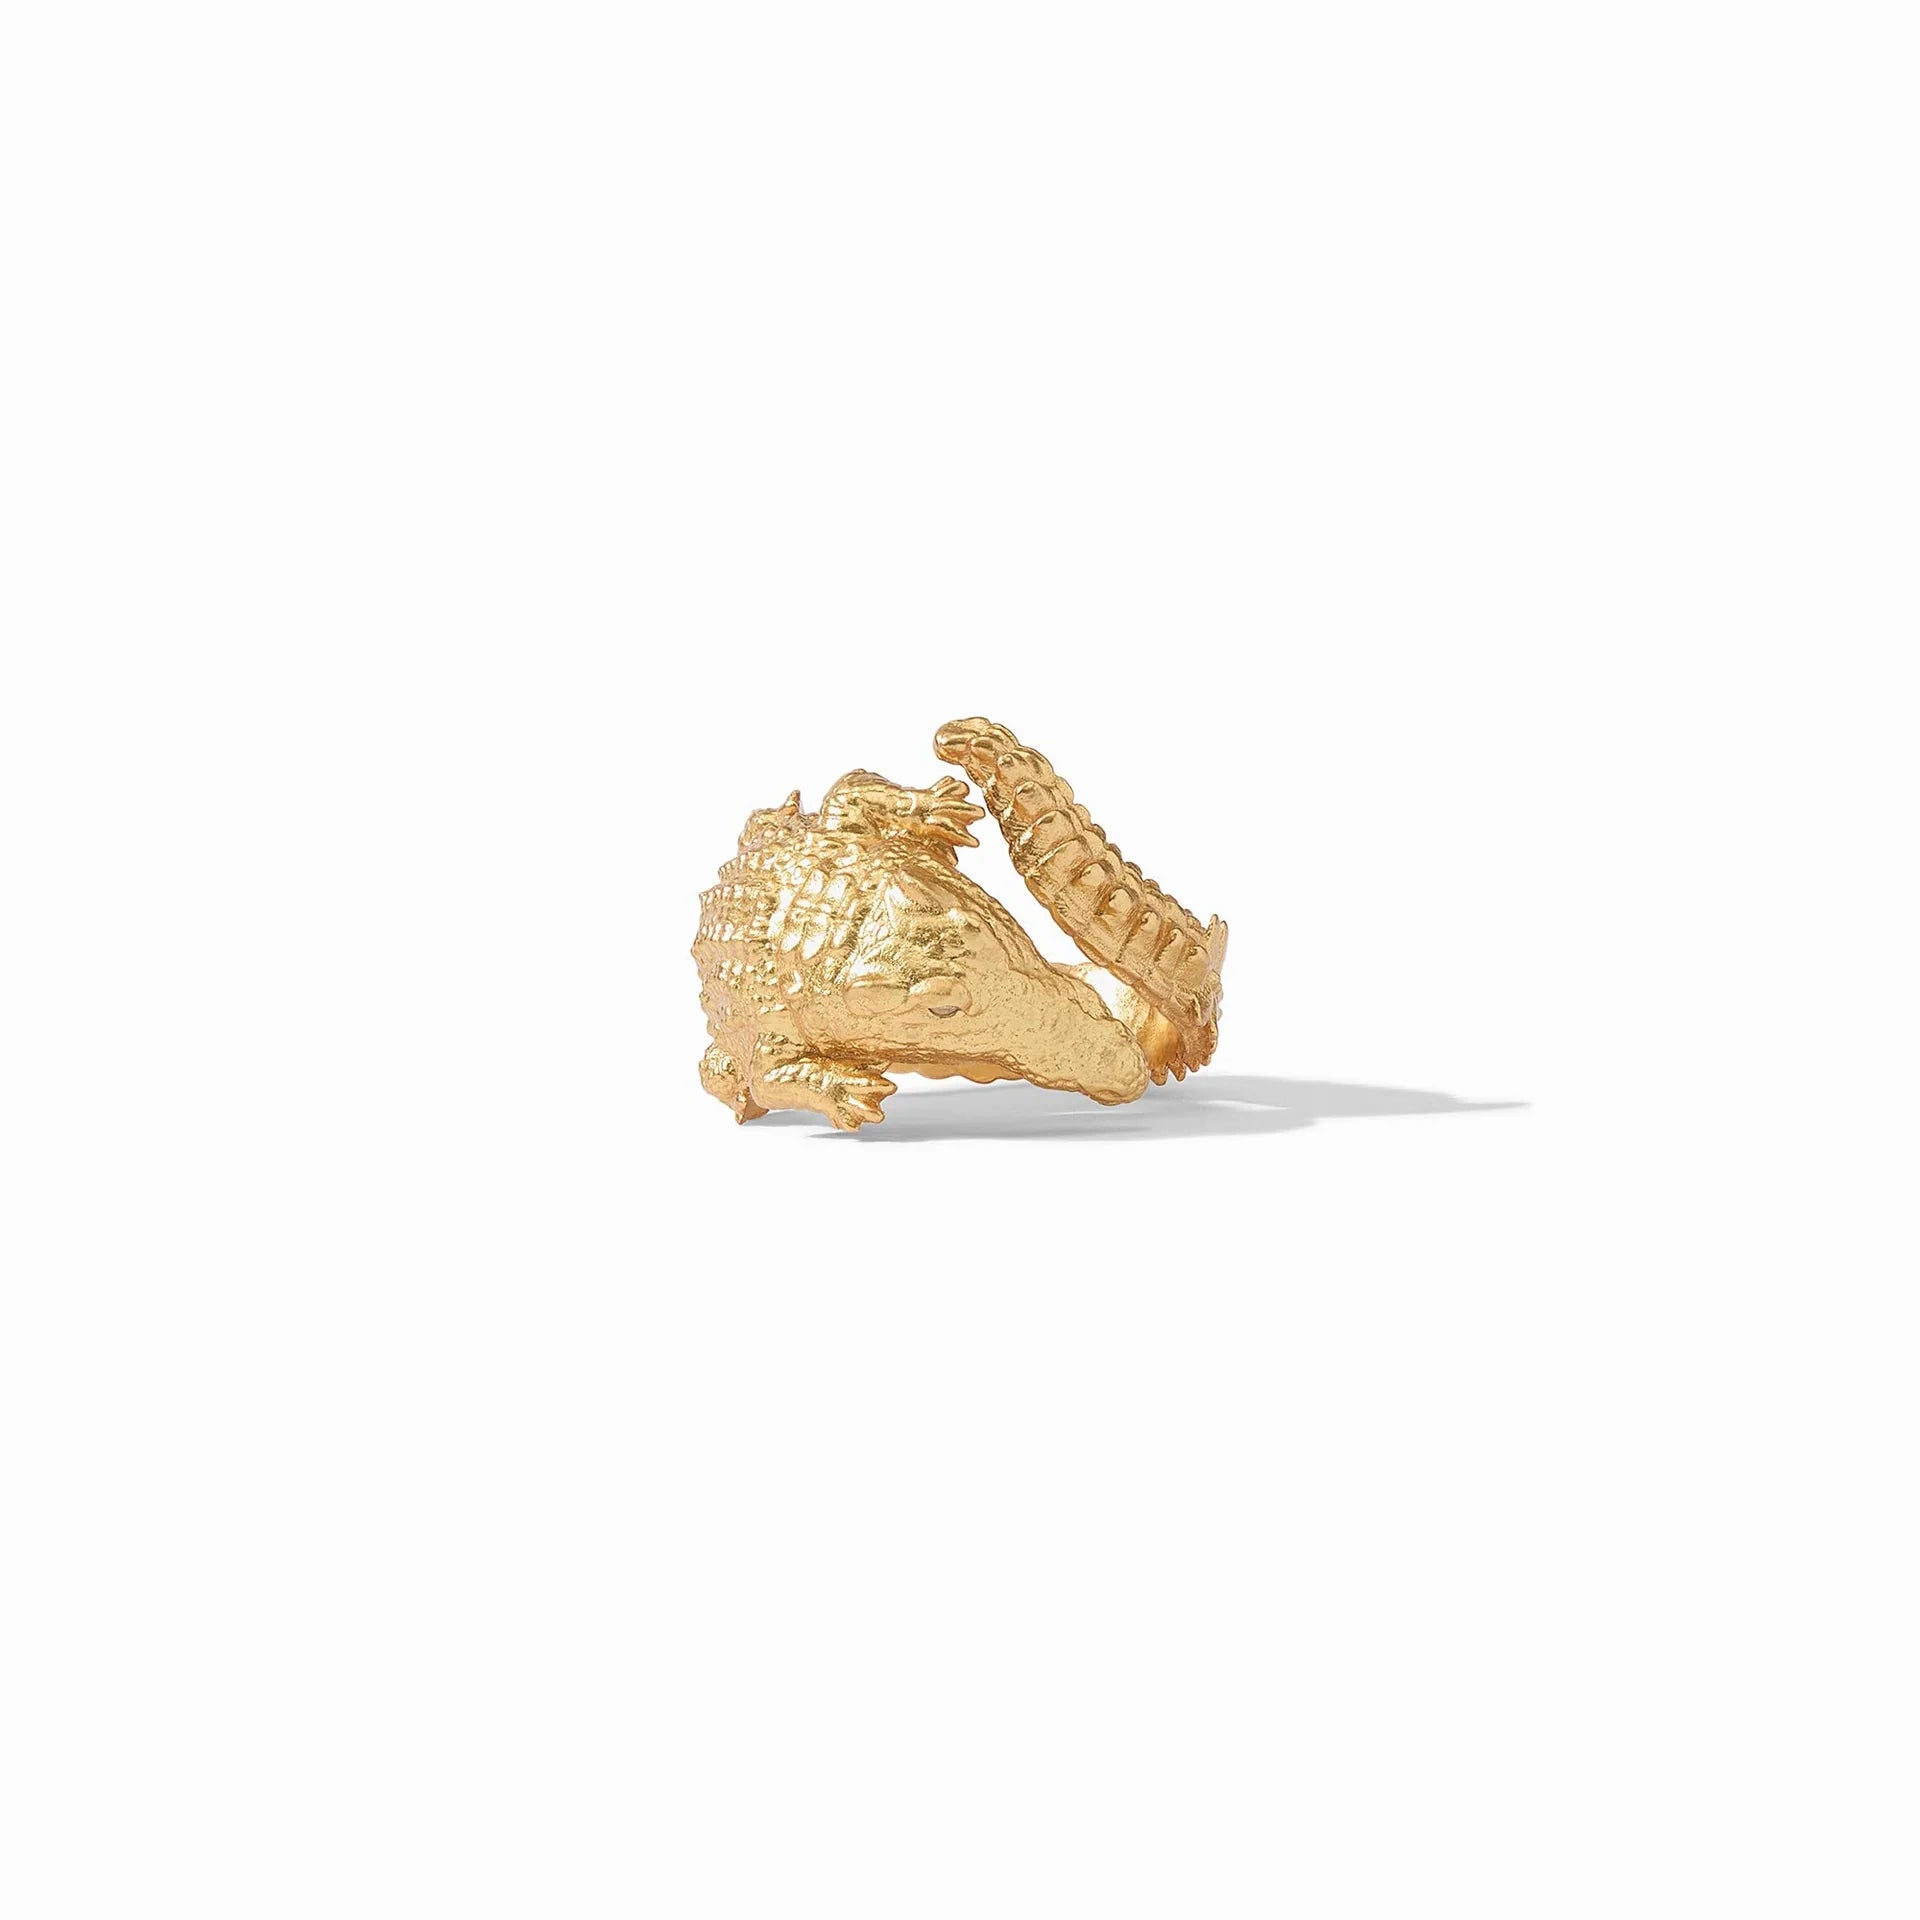 Alligator Ring by Julie Vos features golden alligator with glittering CZ eyes curls. Adjustable band. Shop at The Painted Cottage in Edgewater, MD